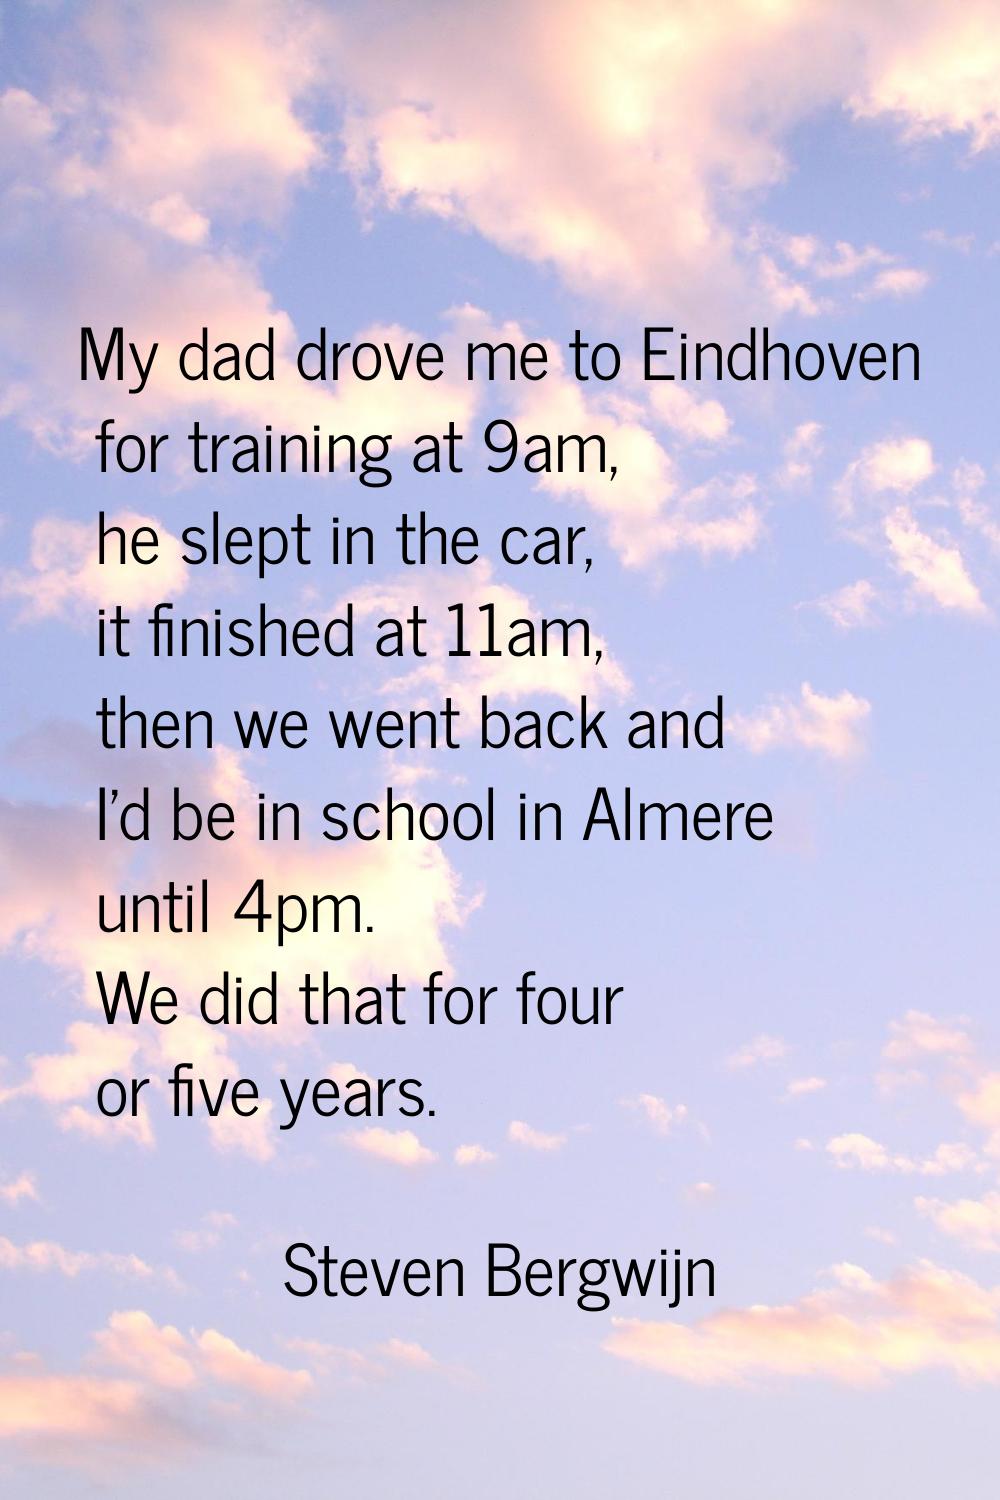 My dad drove me to Eindhoven for training at 9am, he slept in the car, it finished at 11am, then we